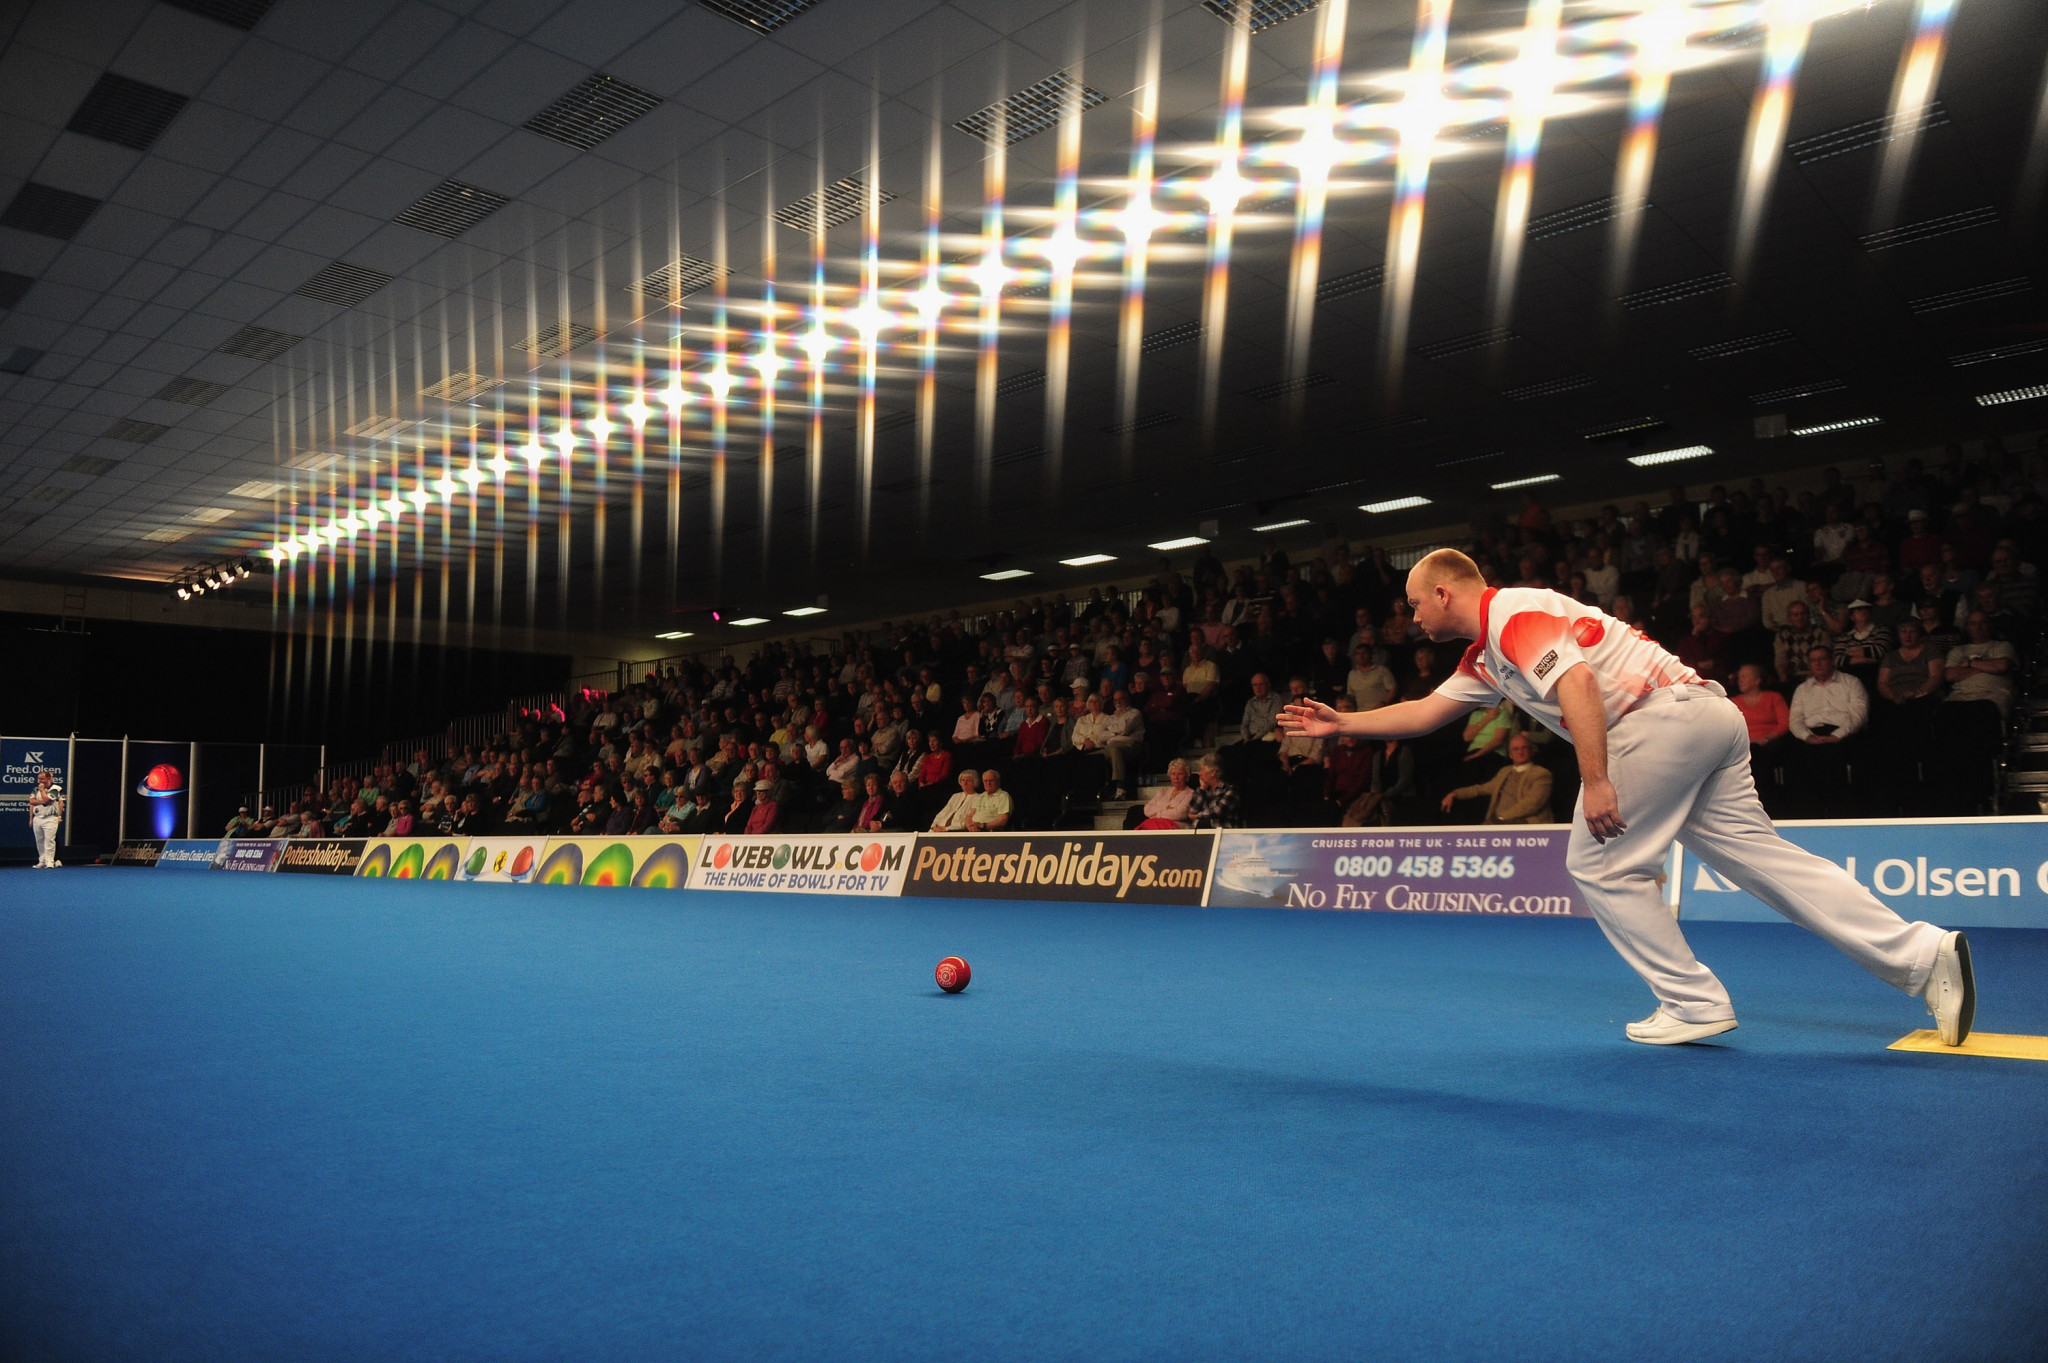 Stewart Anderson of Scotland, pictured, and Guernsey's Alison Merrien beat Australia's Ellen Ryan and England's Robert Paxton at the World Indoor Bowls Championships 
in Potters Bar ©Getty Images